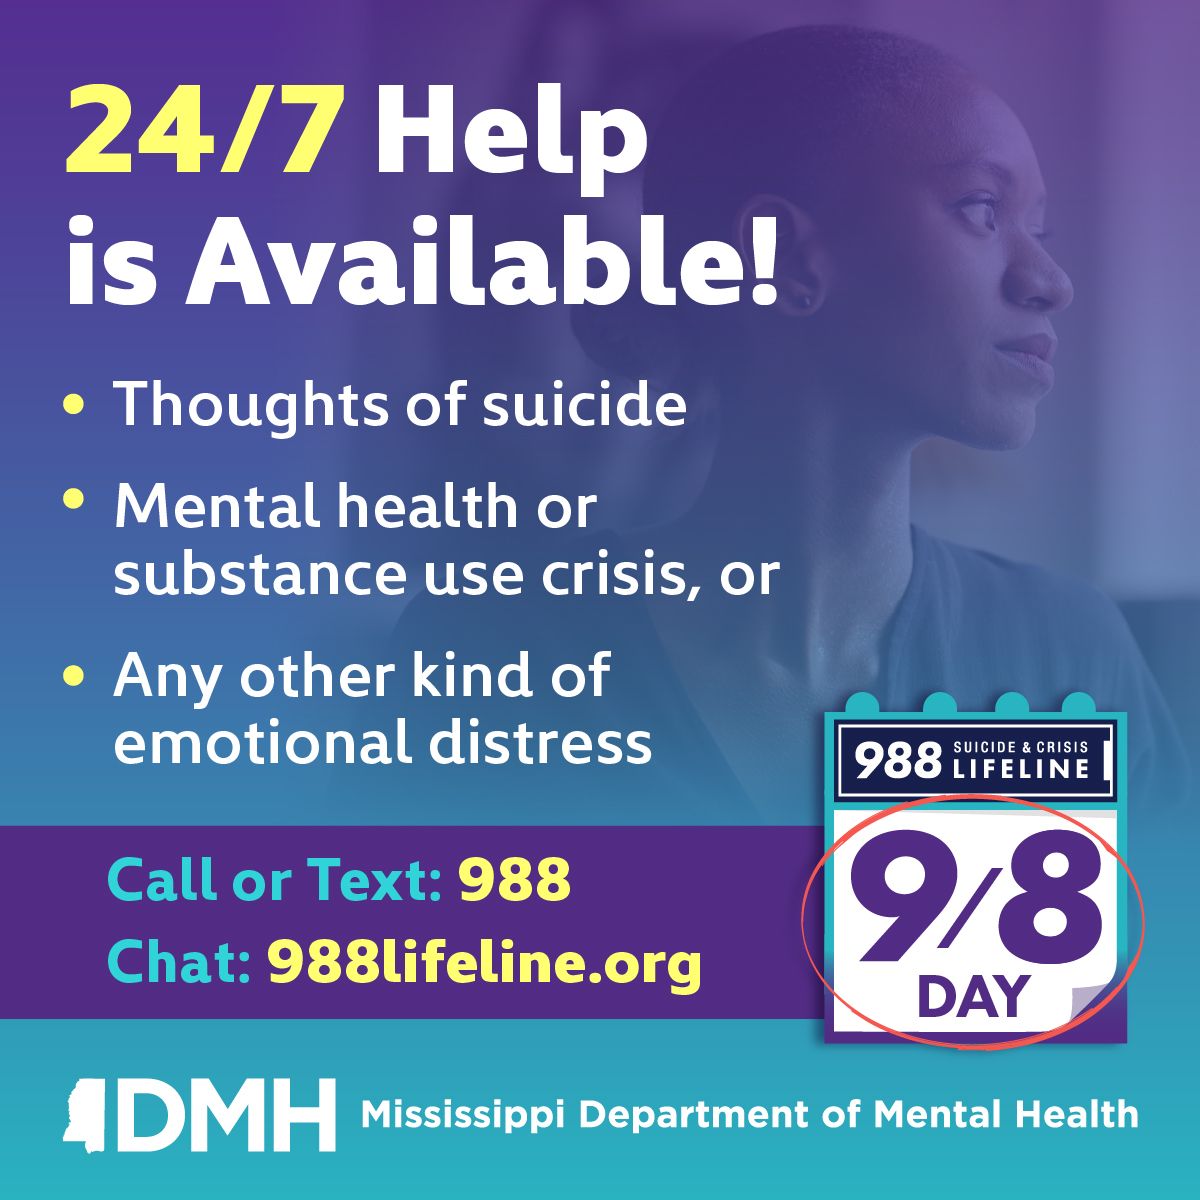 24/7 Help is Available for thoughts of suicide, mental health or substance abuse crisis, or any other kind of emotional distress. Call or Text 988 or Chat on 988lifeline.org. 988 Logo, 9/8 Day logo, MS Department of Mental Health logo